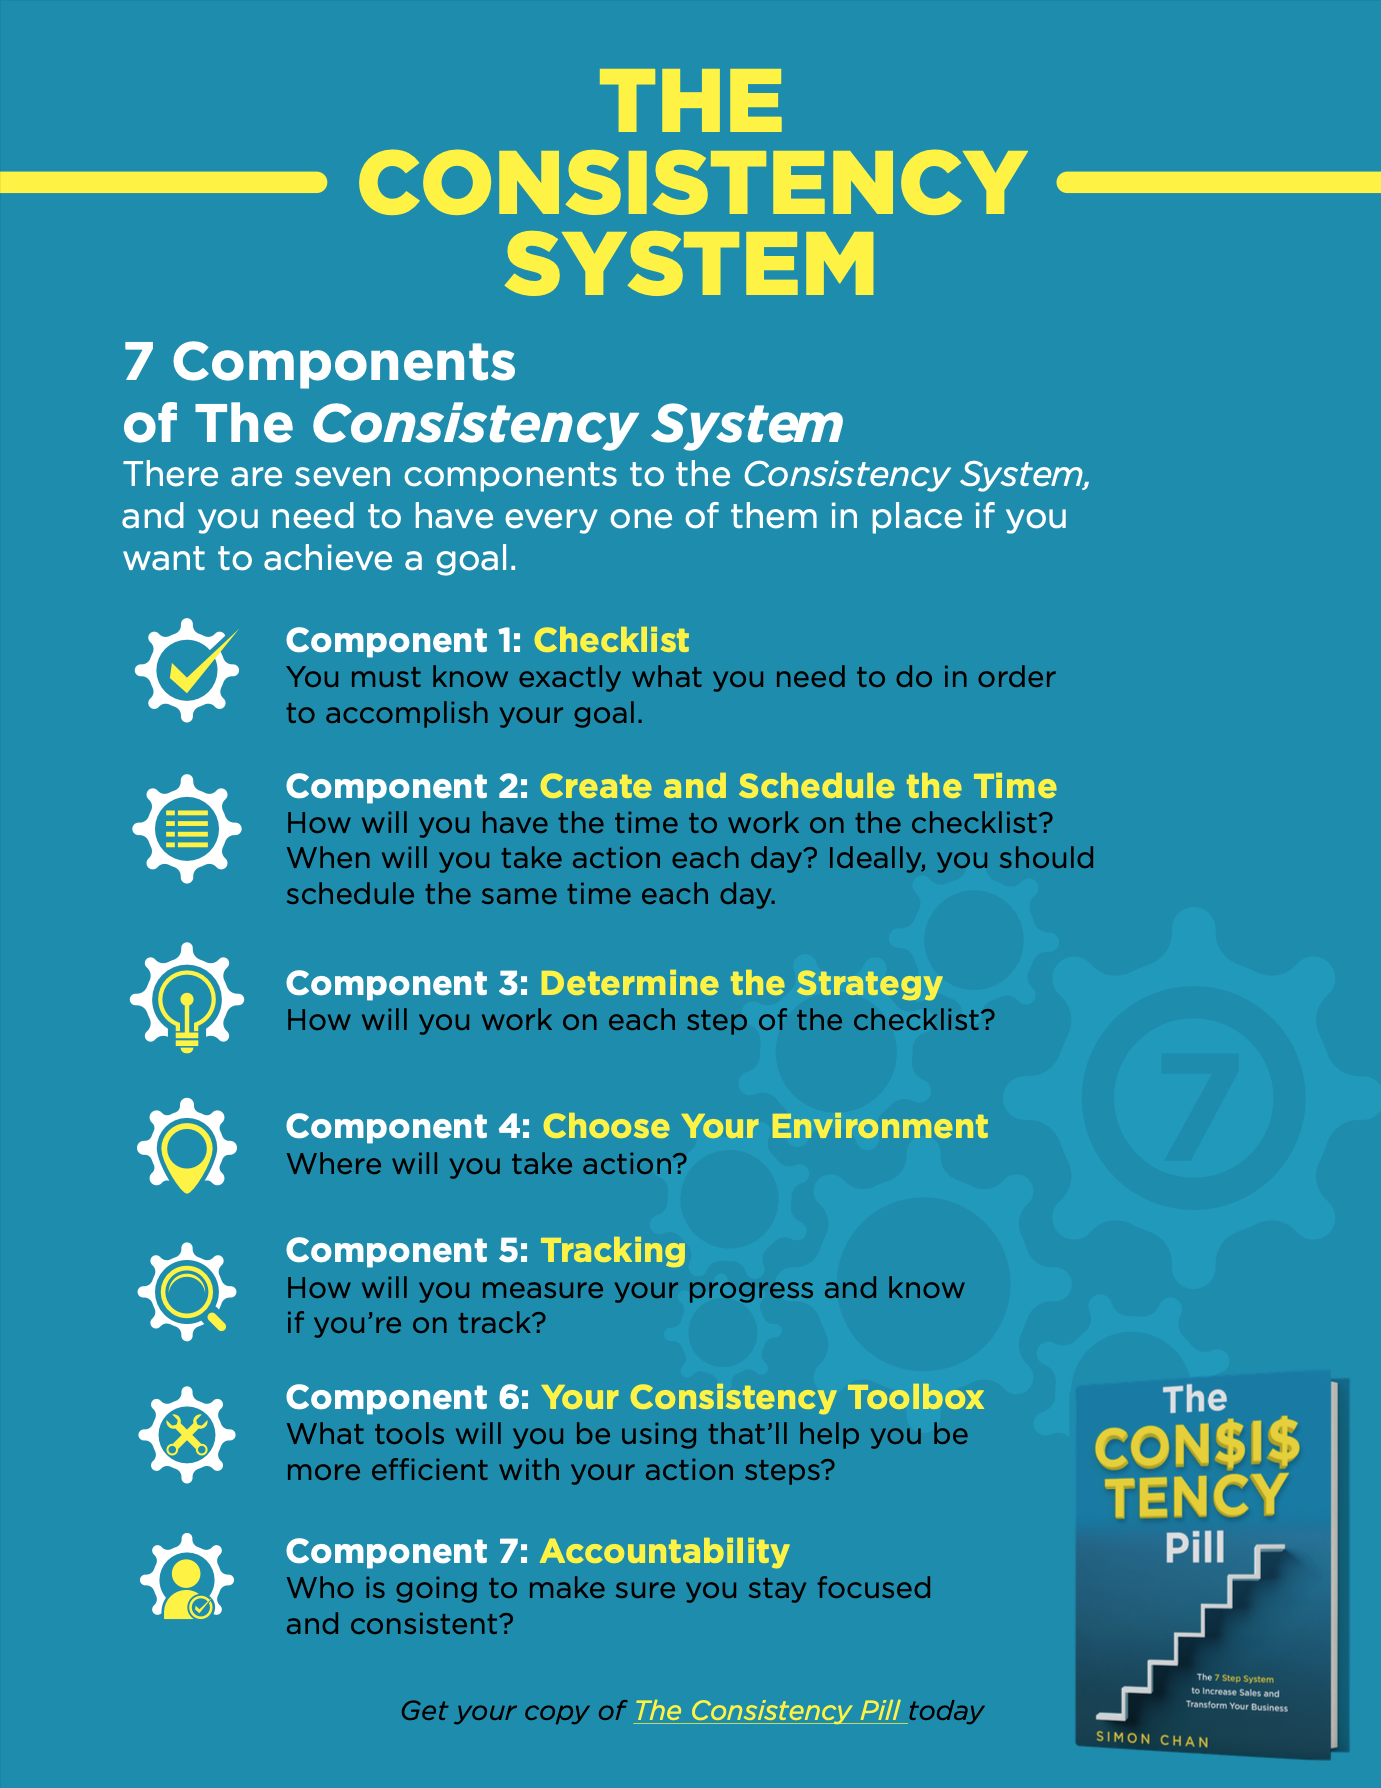 7 Components of The Consistency System